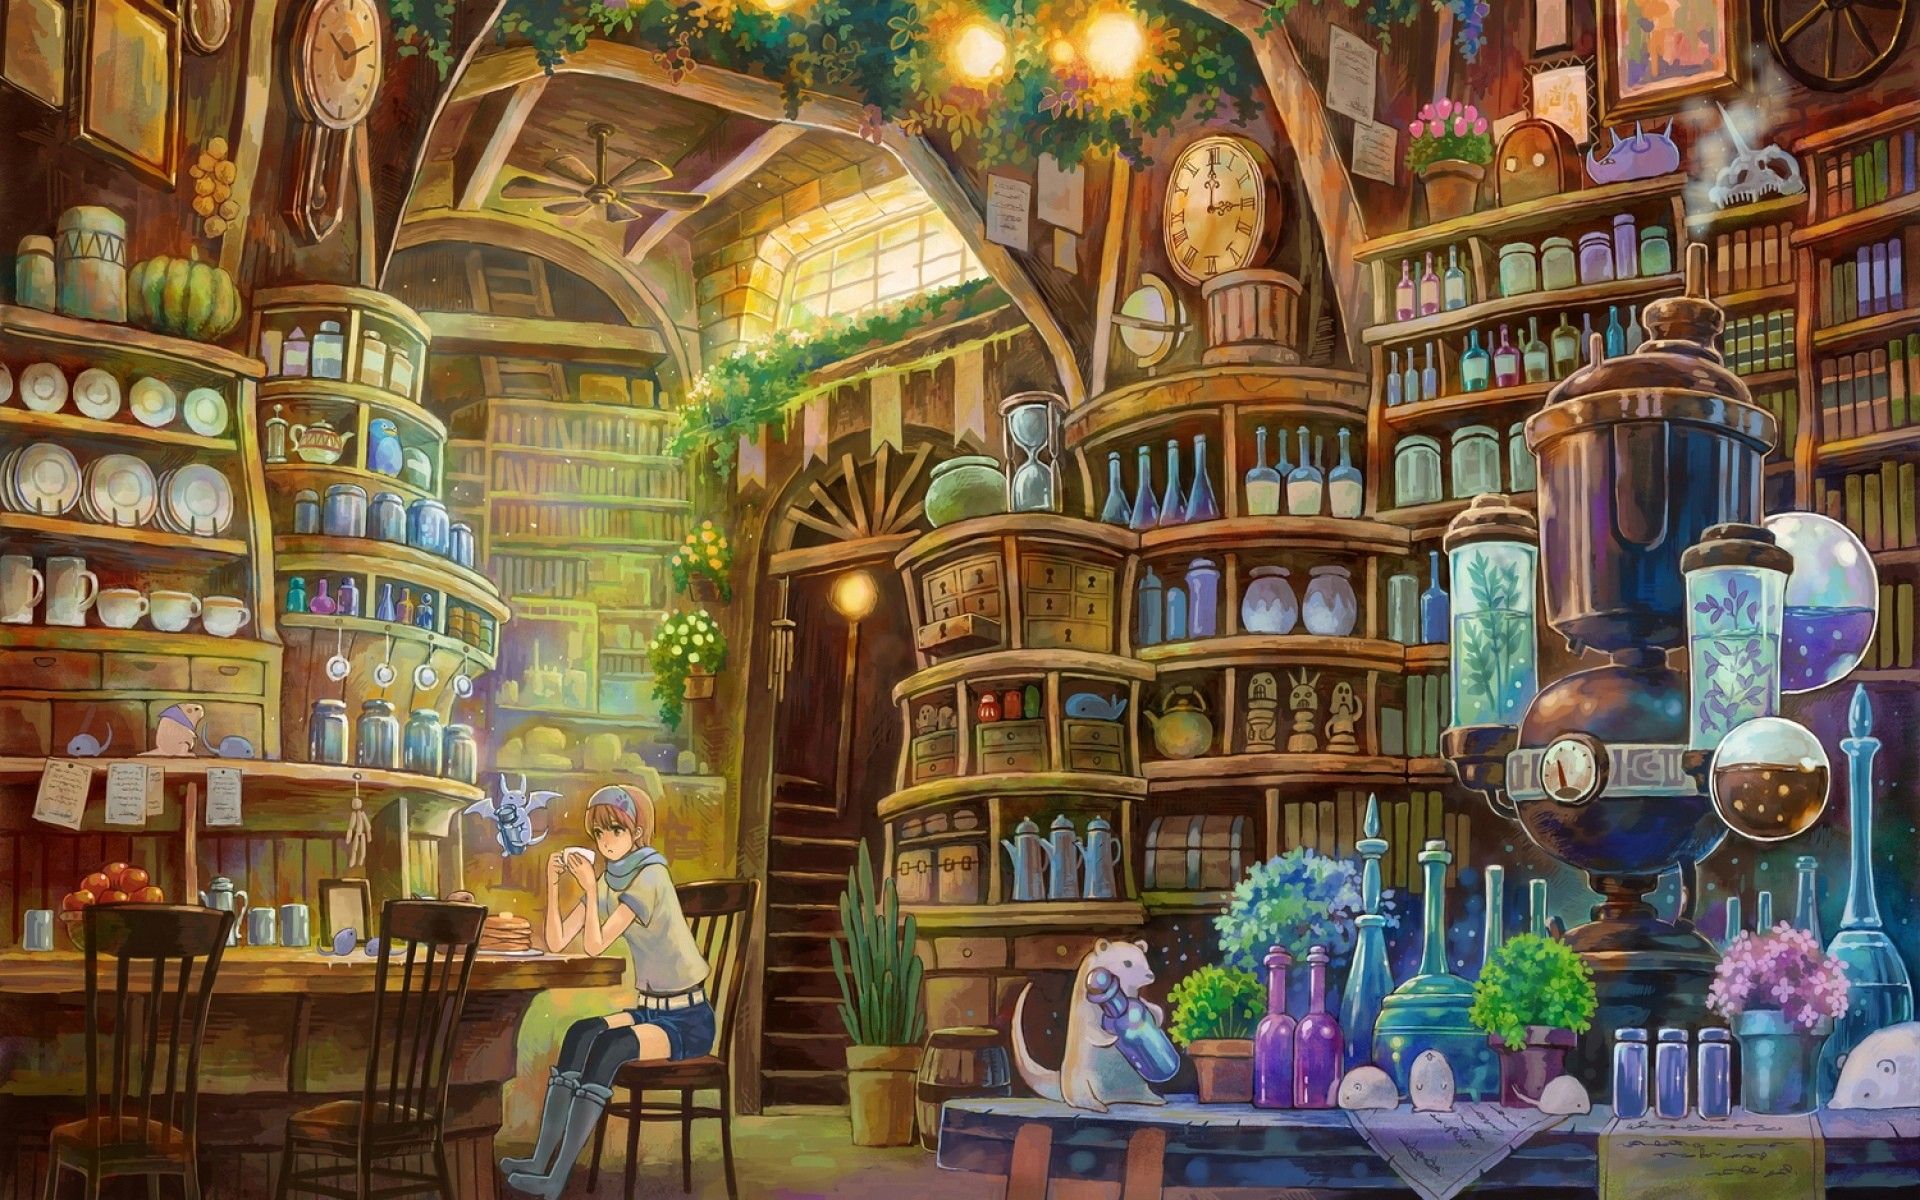 lights, bottles, cups, clocks, stairways, fantasy art, chairs, artwork, anime girls, potion, plates, arches, shelves, jars, interior spaces wallpaper